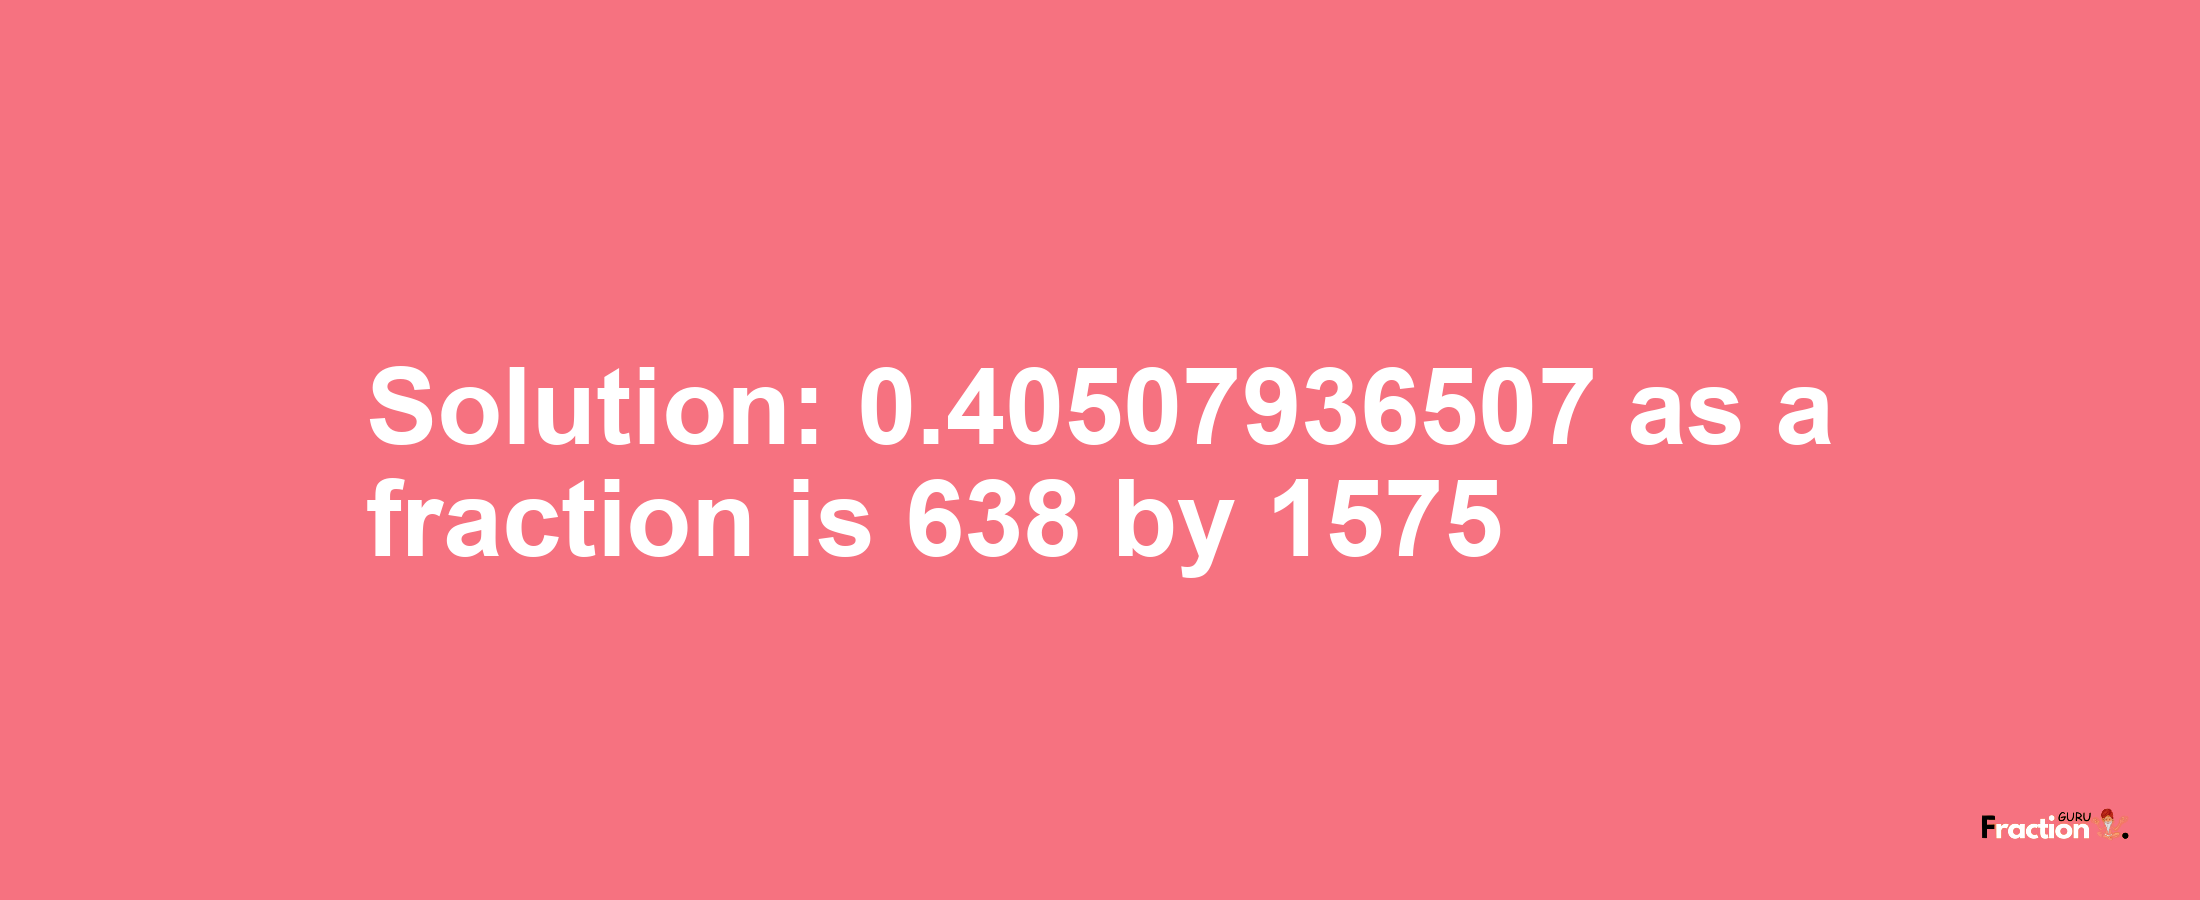 Solution:0.40507936507 as a fraction is 638/1575